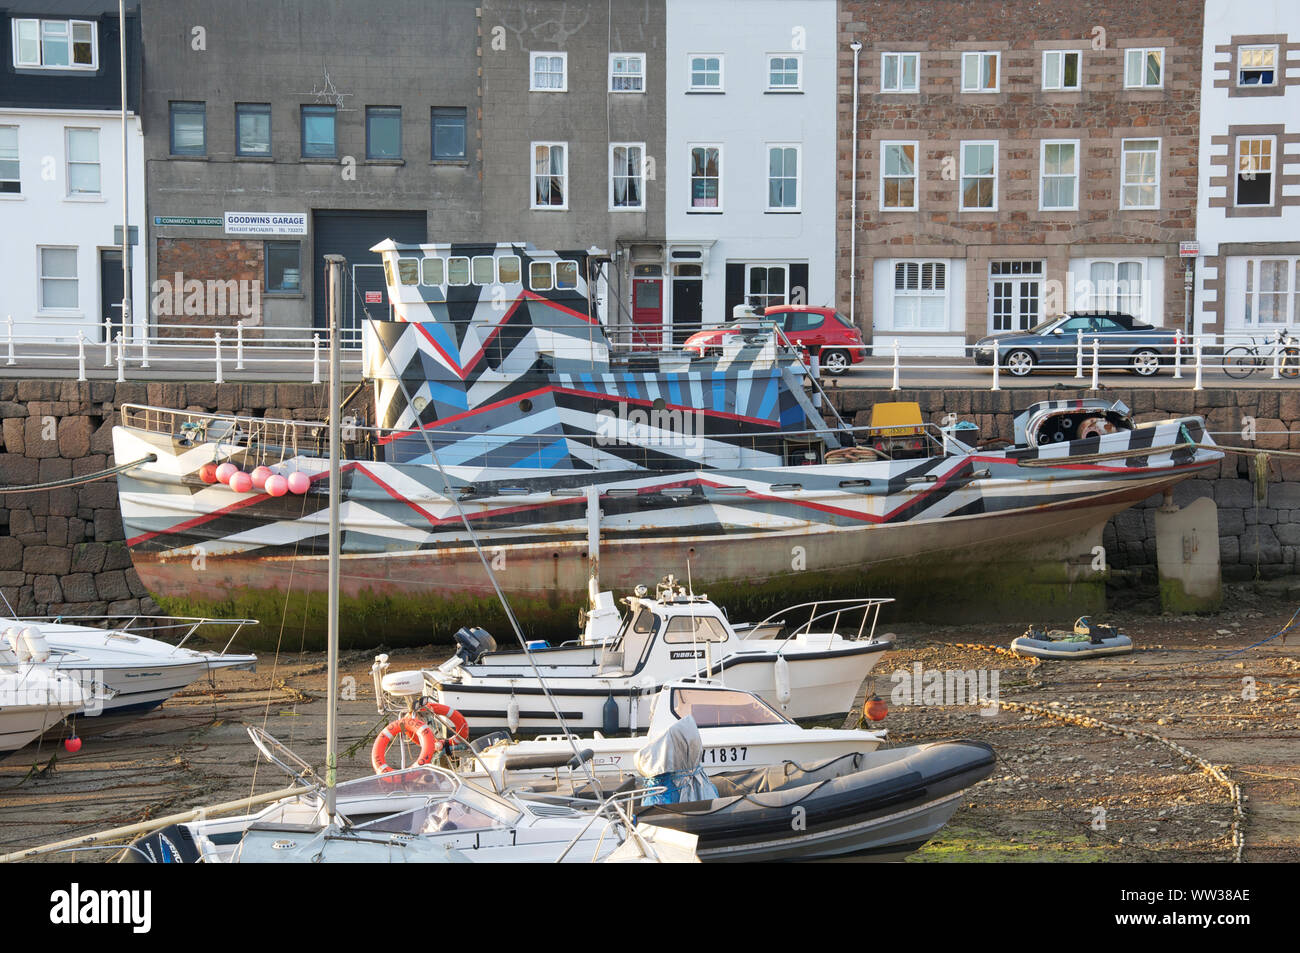 The tugboat Elektra painted in a dazzle camouflage design by artists Matt Daly and Ian Rolls, commemorating the centenary of WW1. St Helier, Jersey. Stock Photo